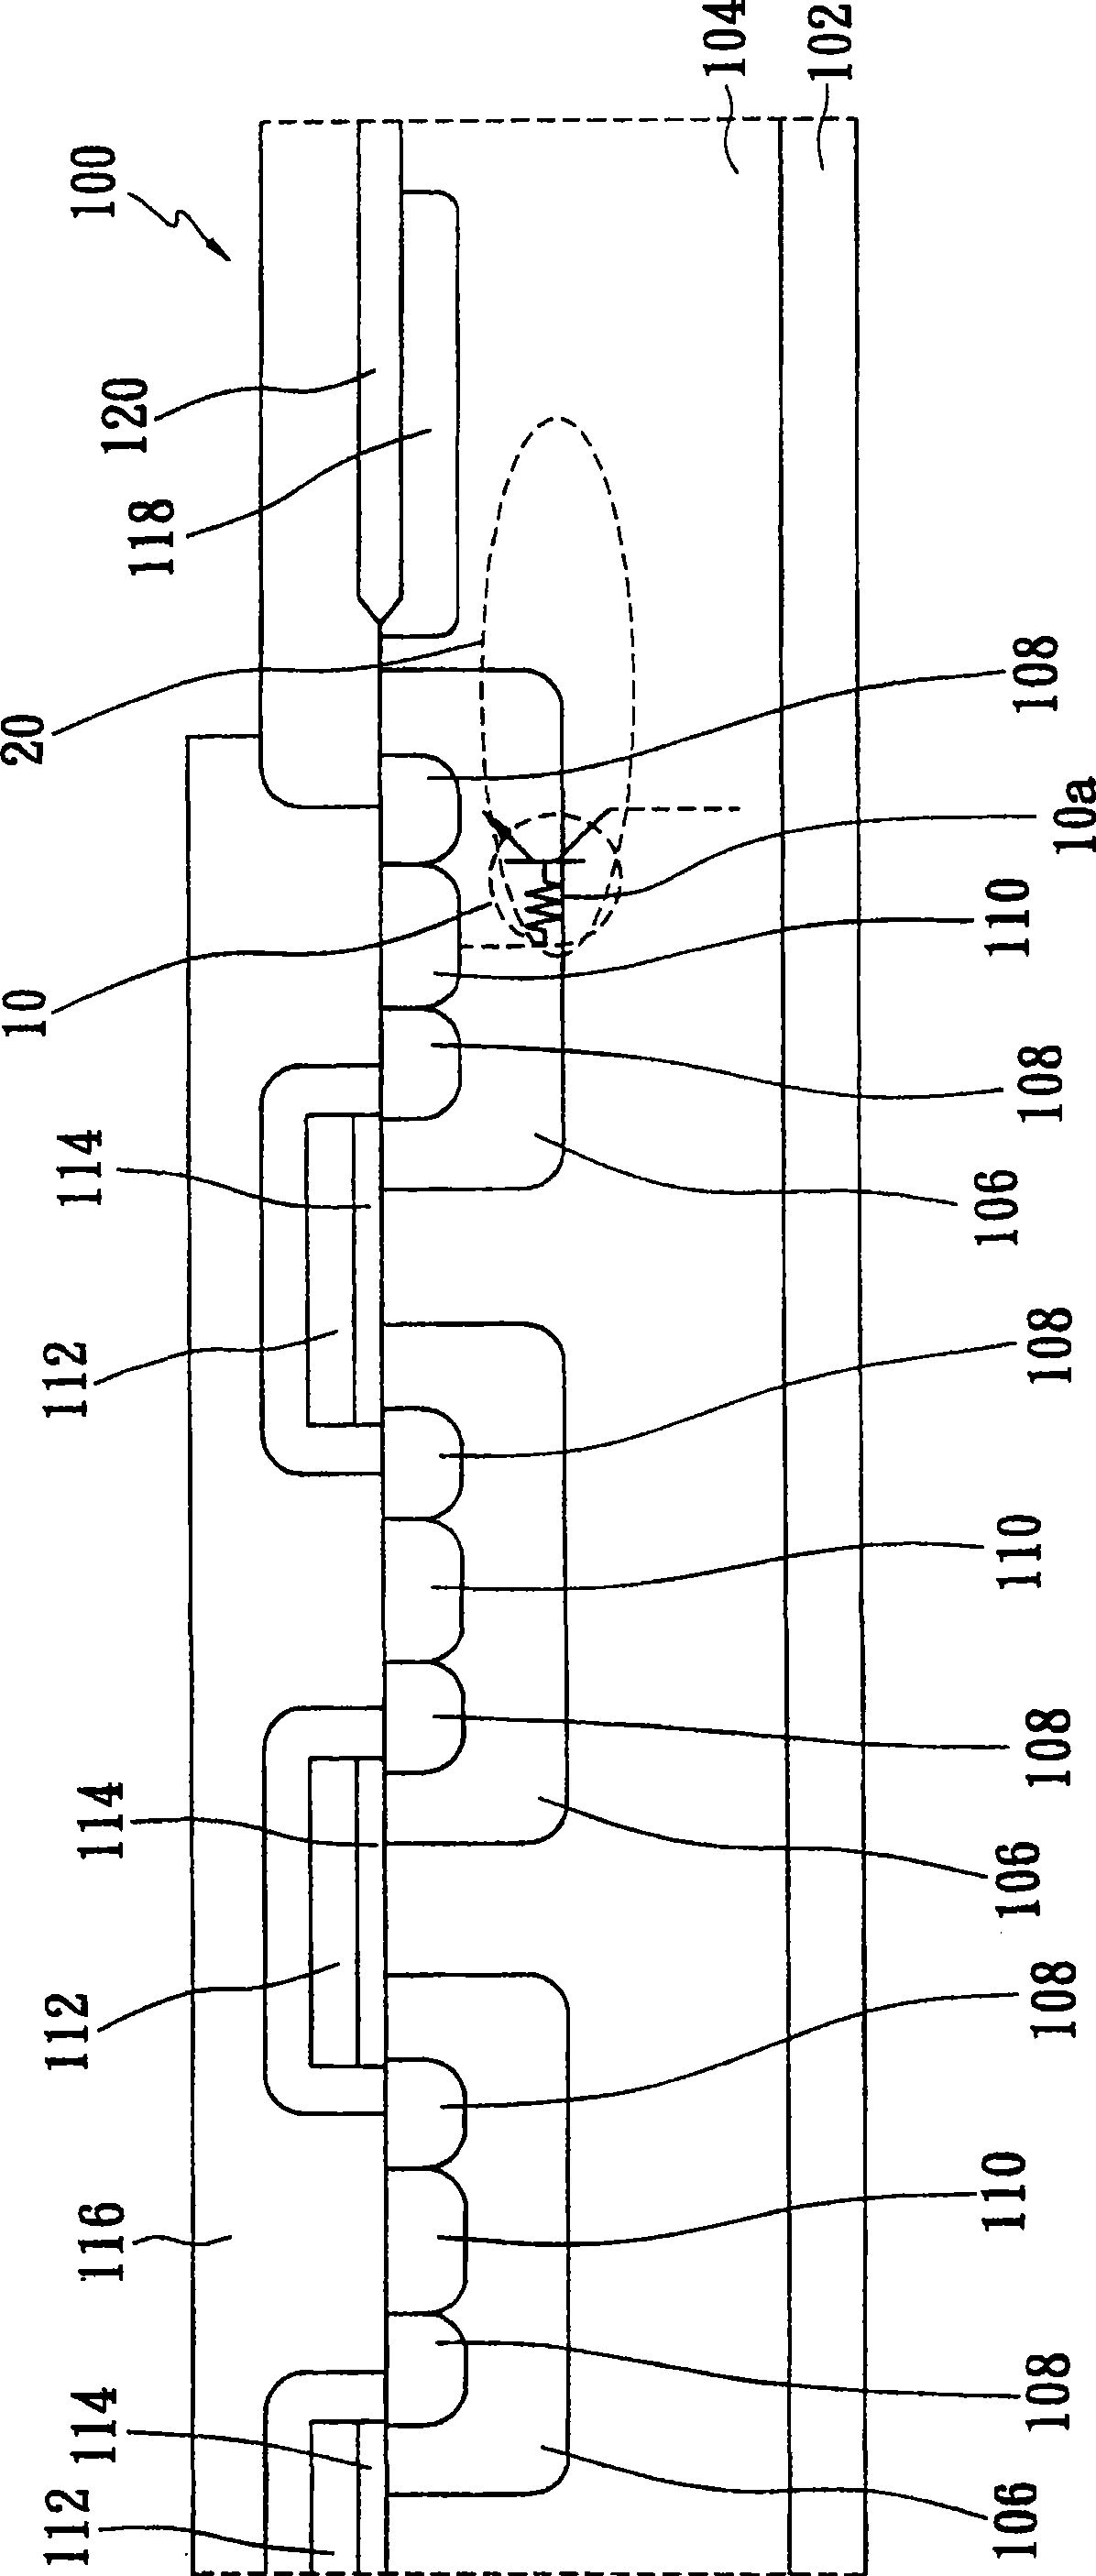 Transistor structure with breakdown protection